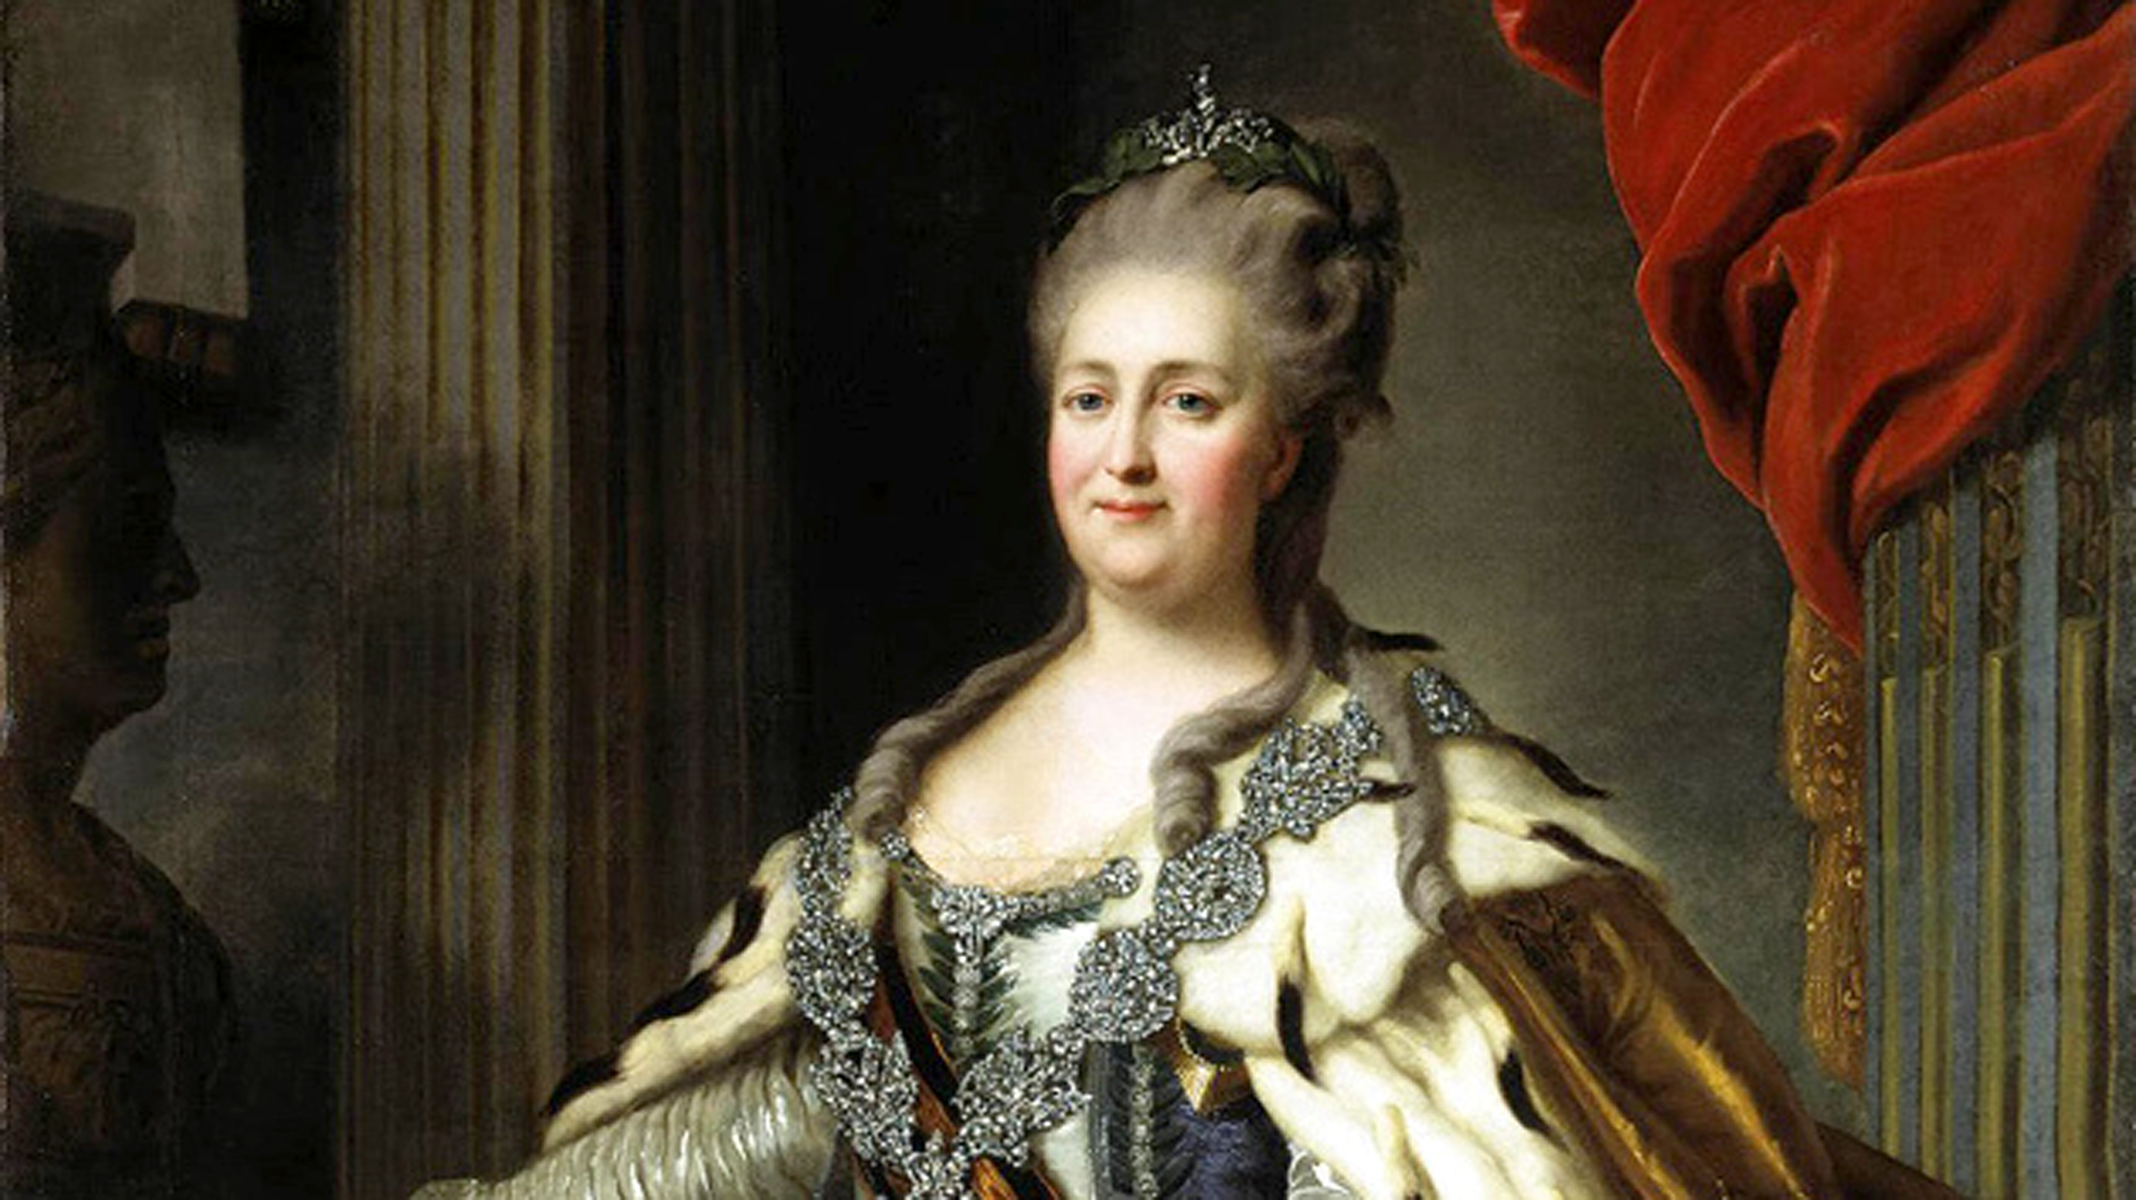  Czar Catherine the Great ruled Russia from 1729 to 1796.